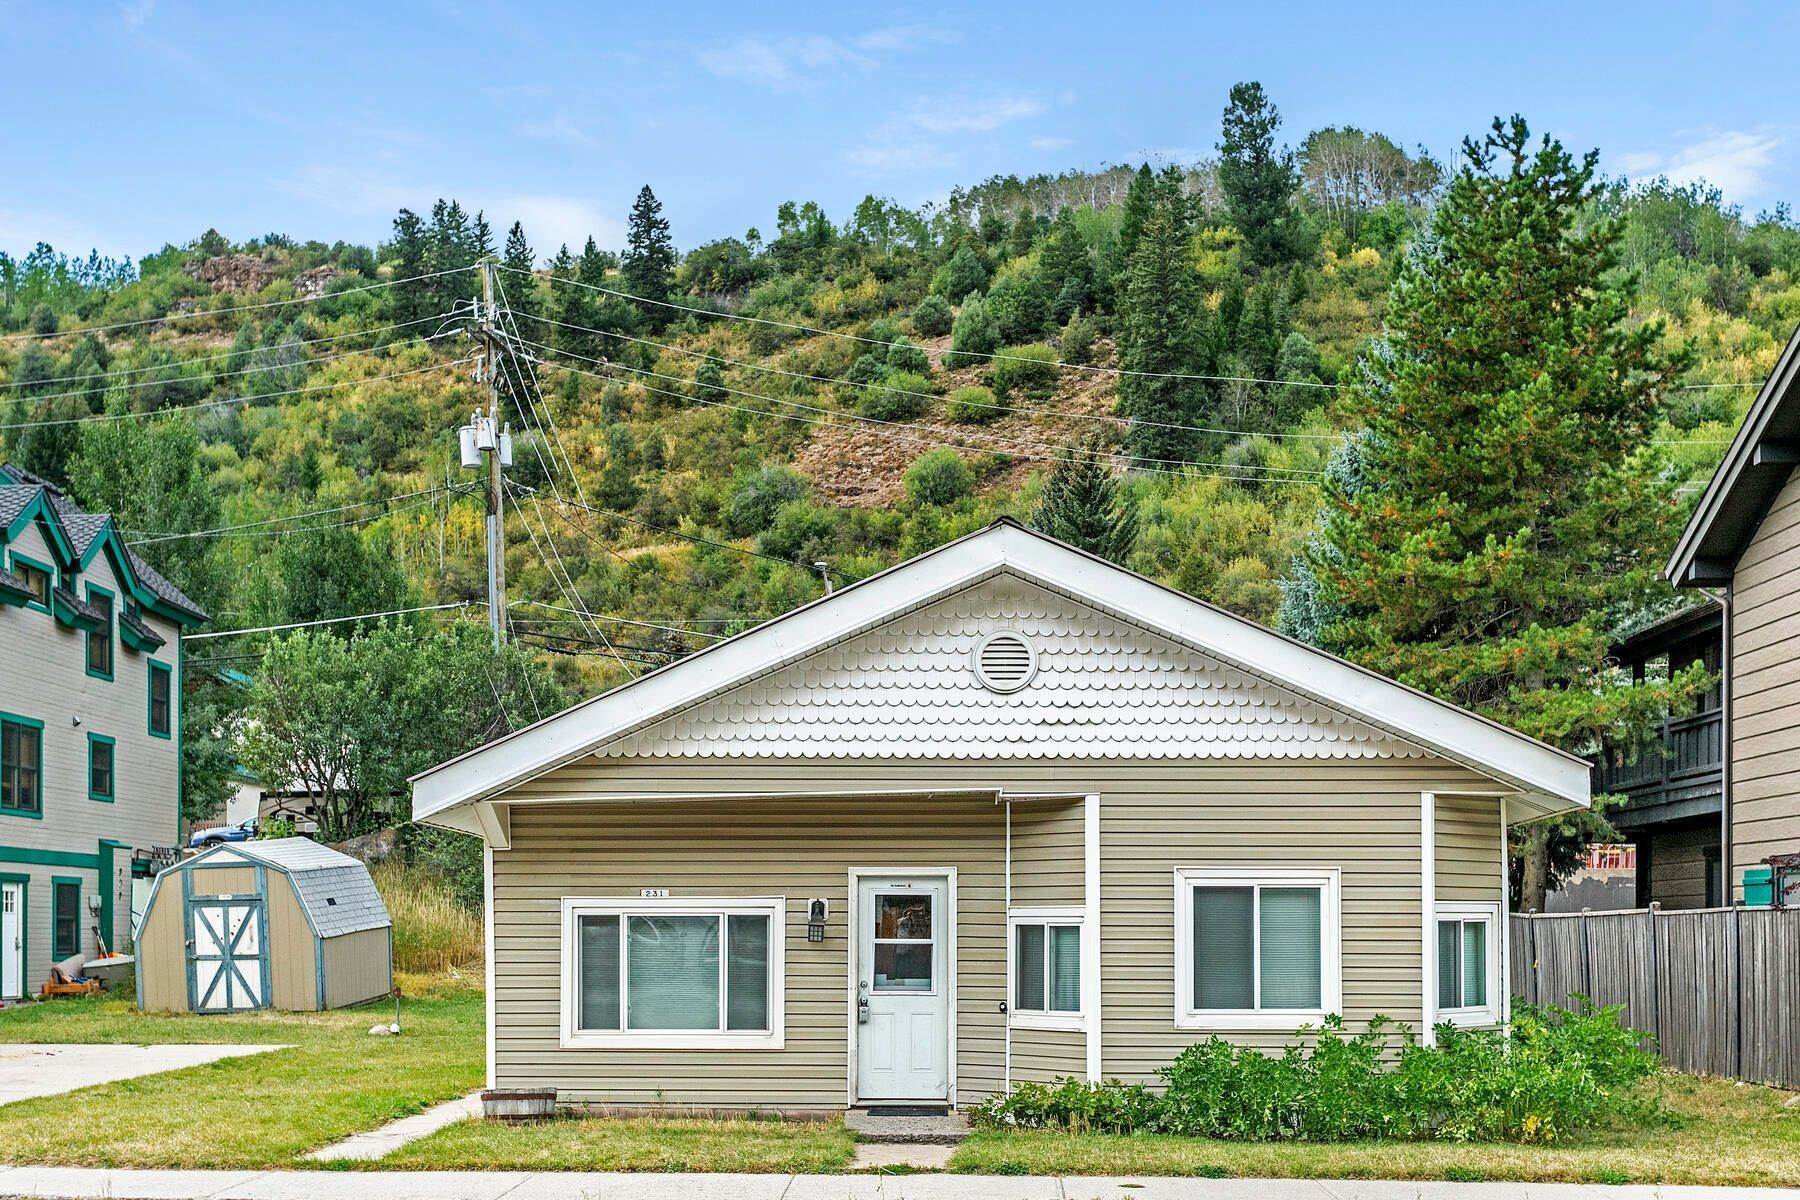 Single Family Homes for Active at Downtown Minturn residence 231 Main Street Minturn, Colorado 81645 United States